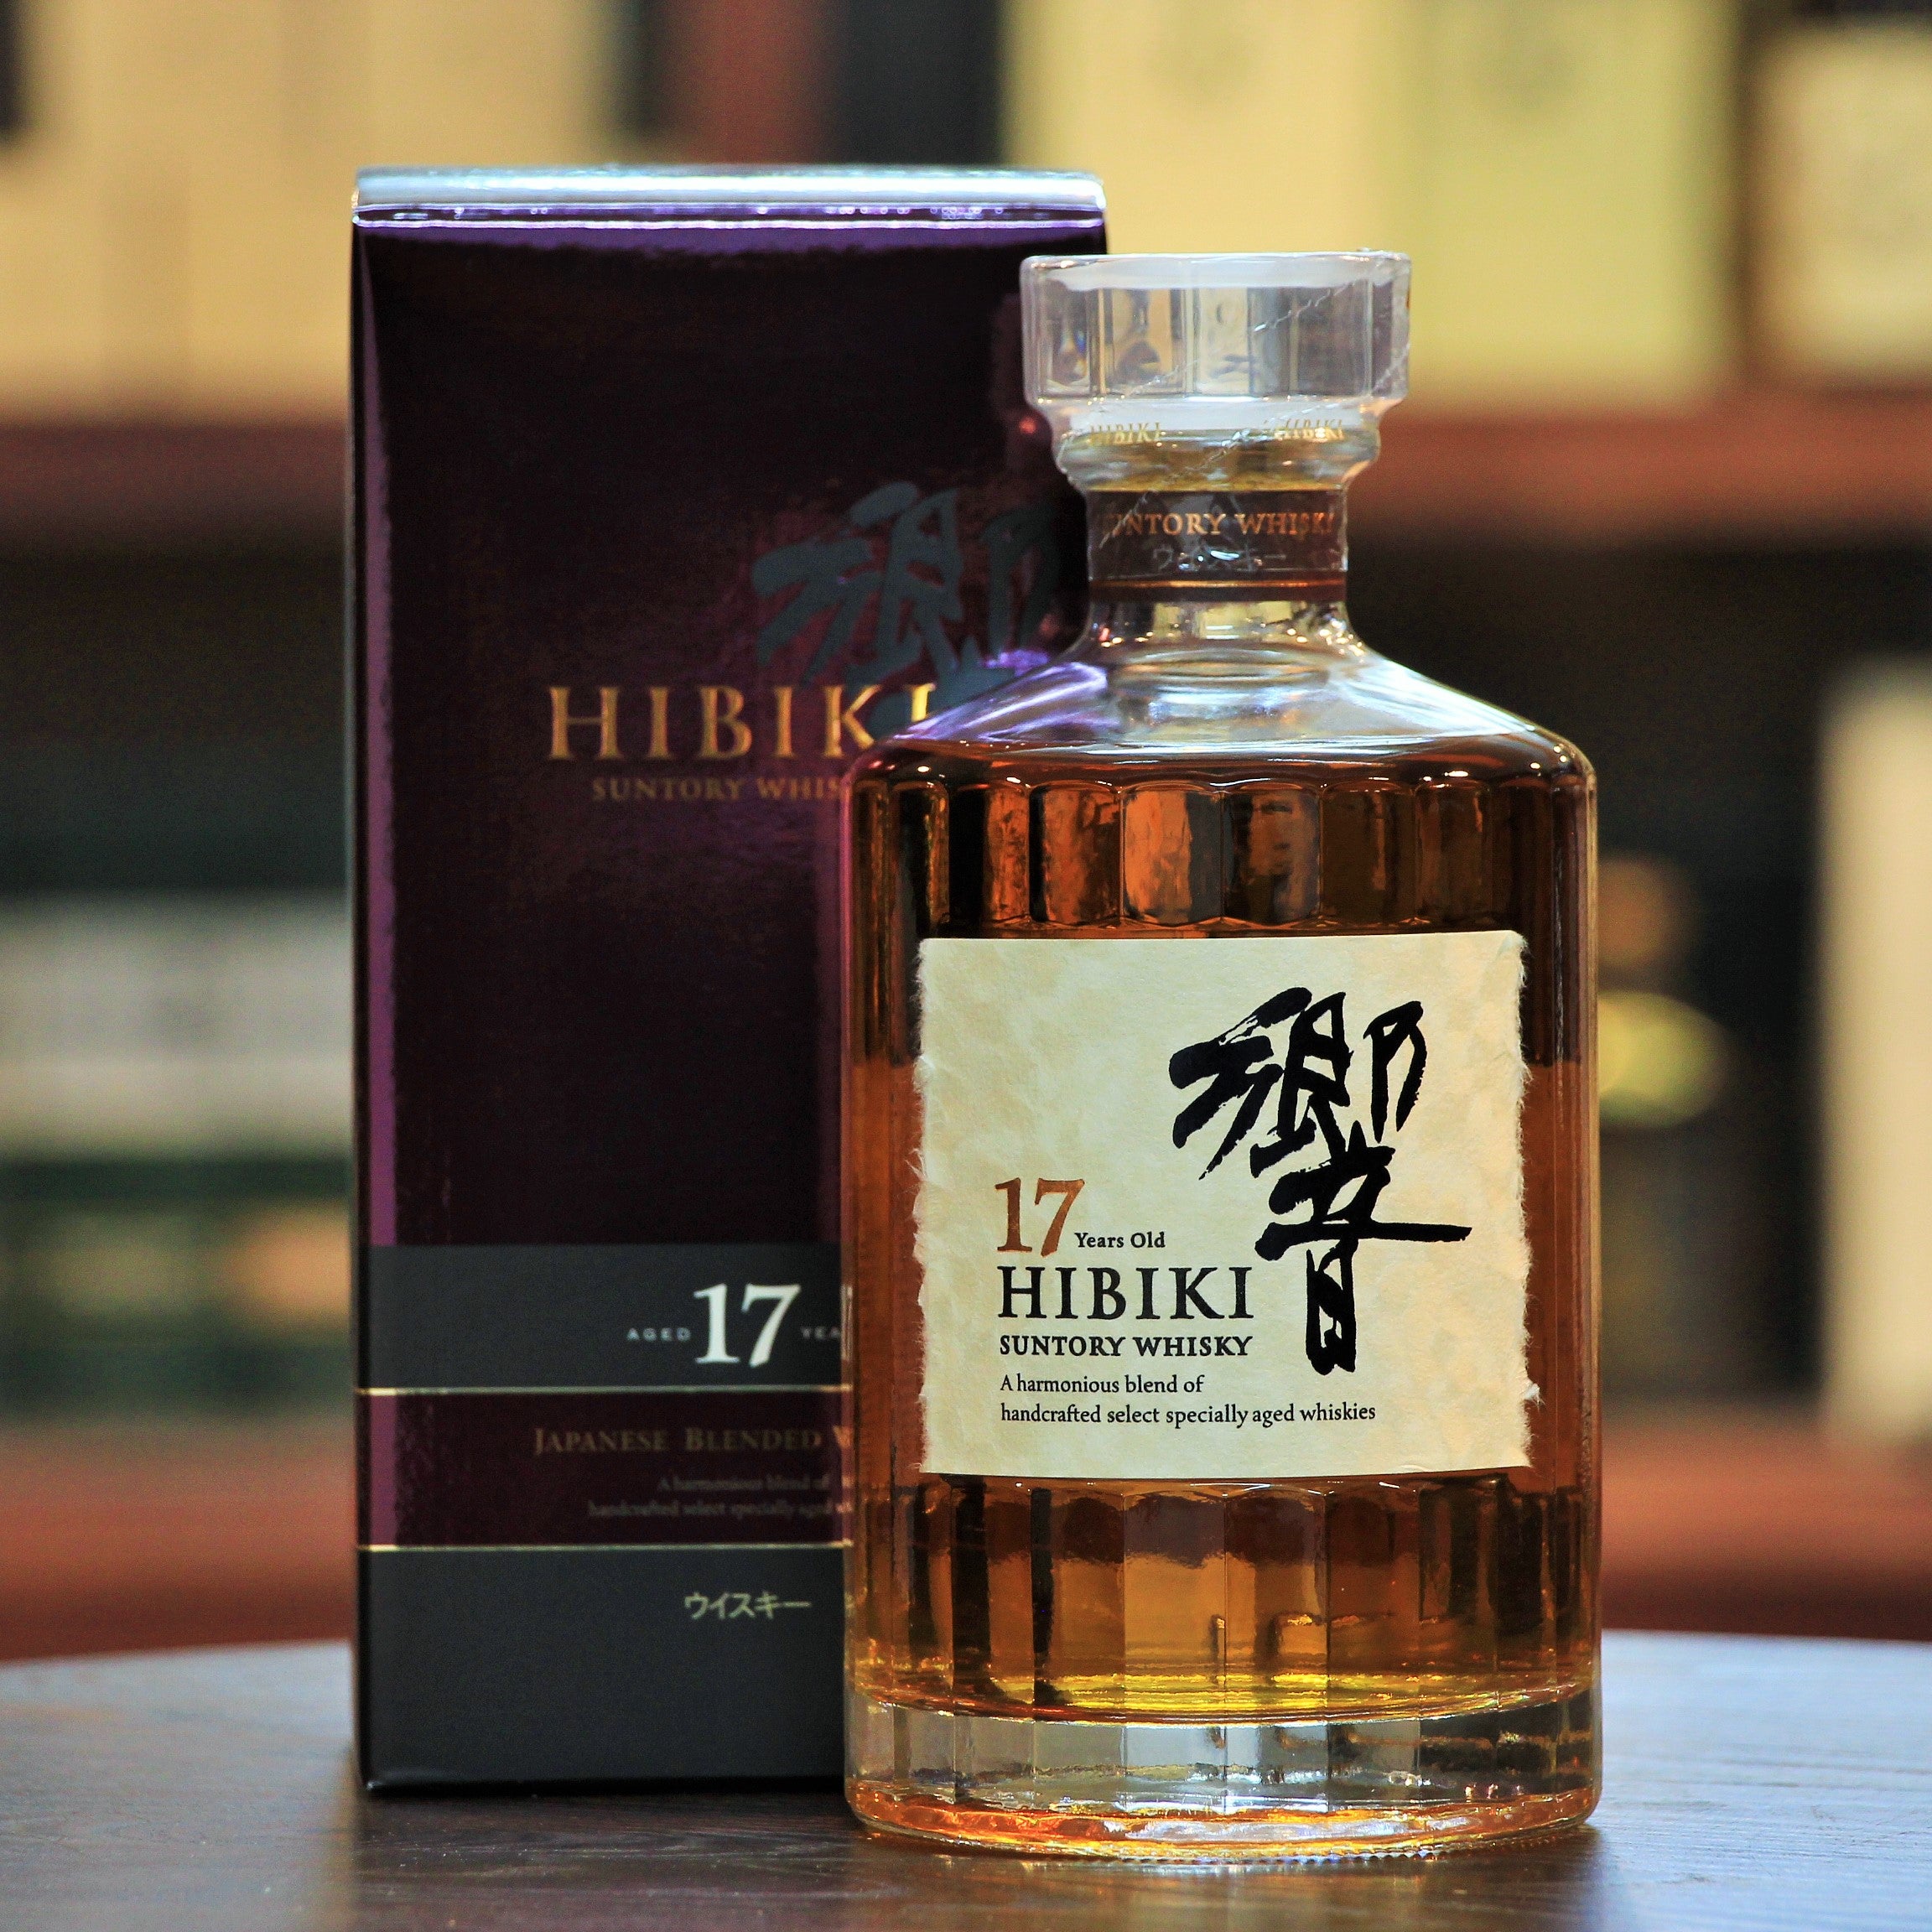 Hibiki 17 Years Blended Whisky (Discontinued), International Spirits Challenge 2016 Gold Award. World Whiskies Award (Best Blended Japanese Whiskies between 13 and 20 years).